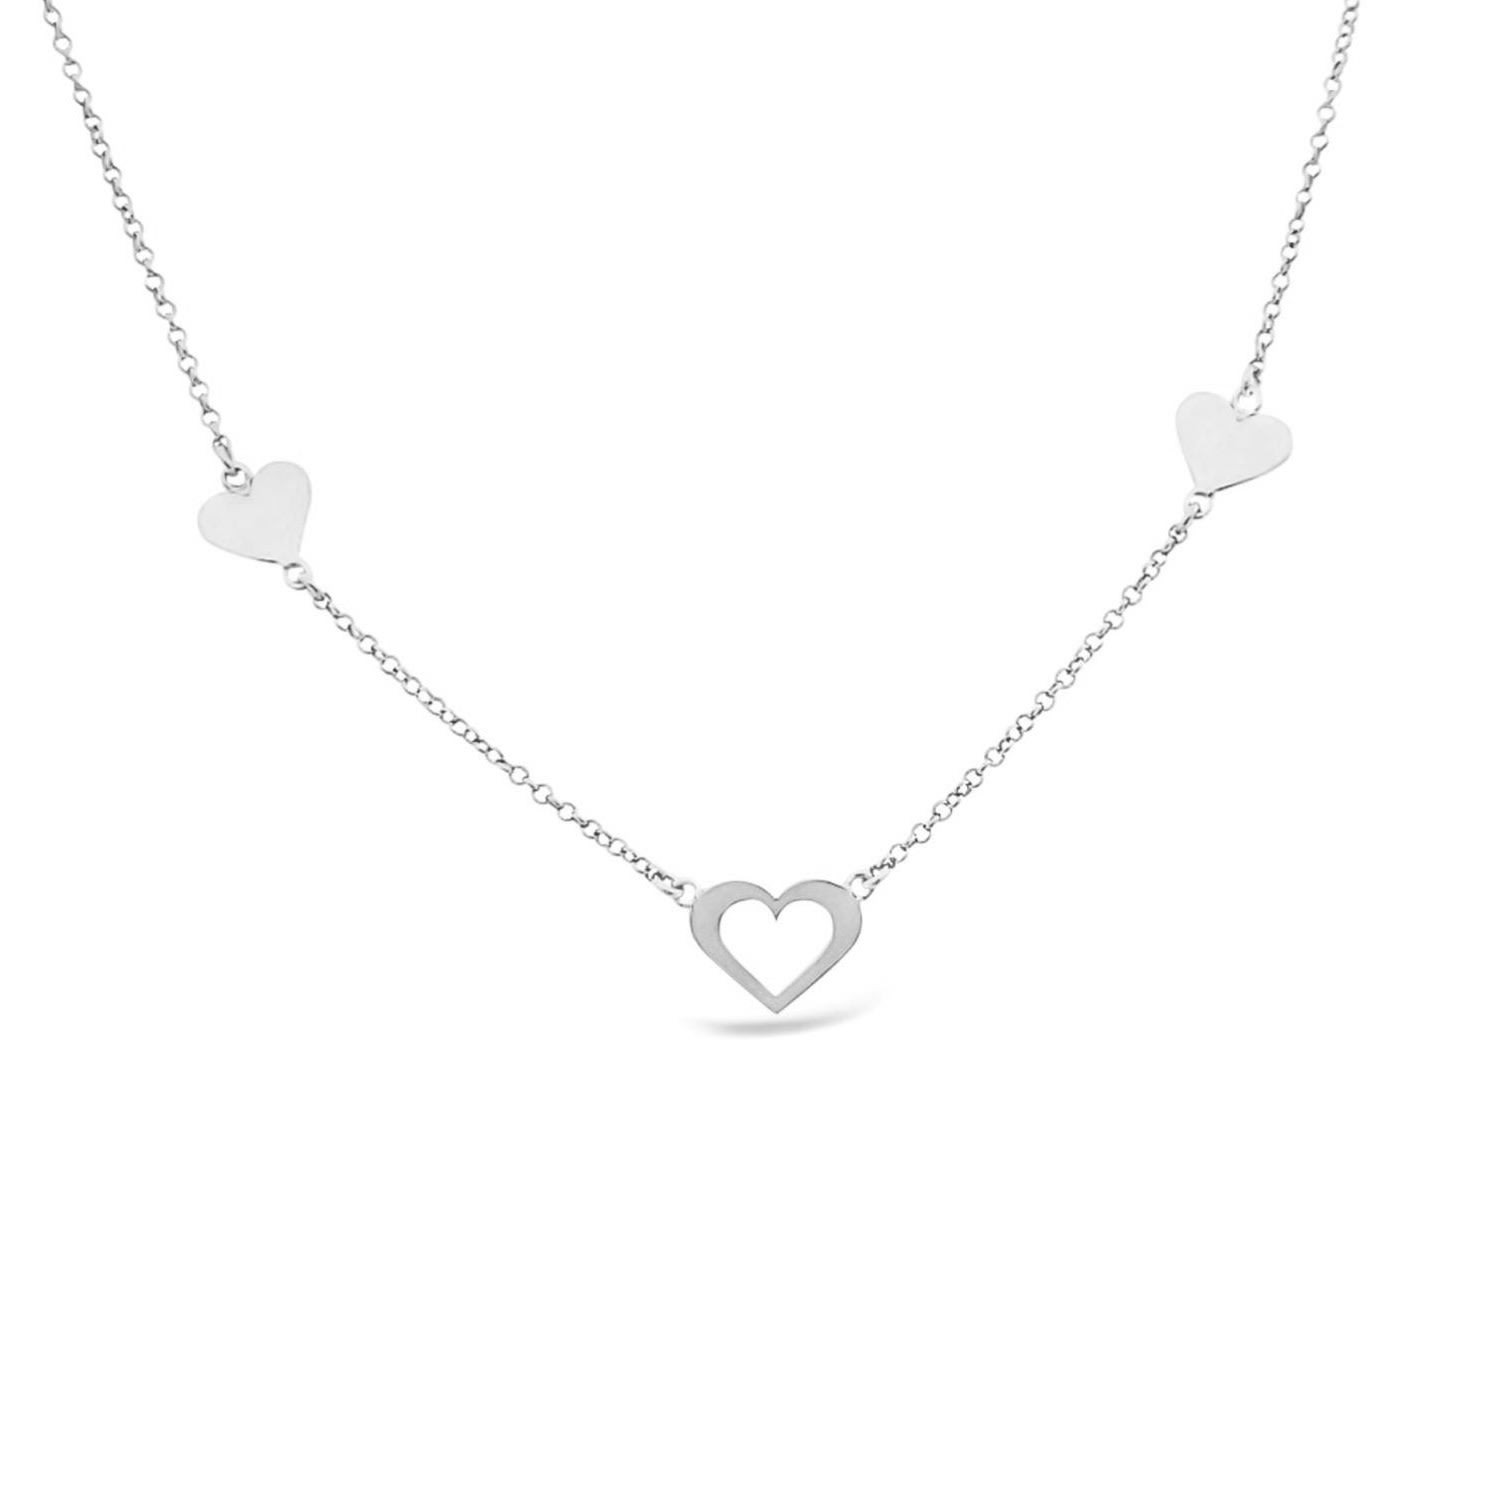 Women’s Silver Three Hearts With One Open Heart Necklace Lutiro